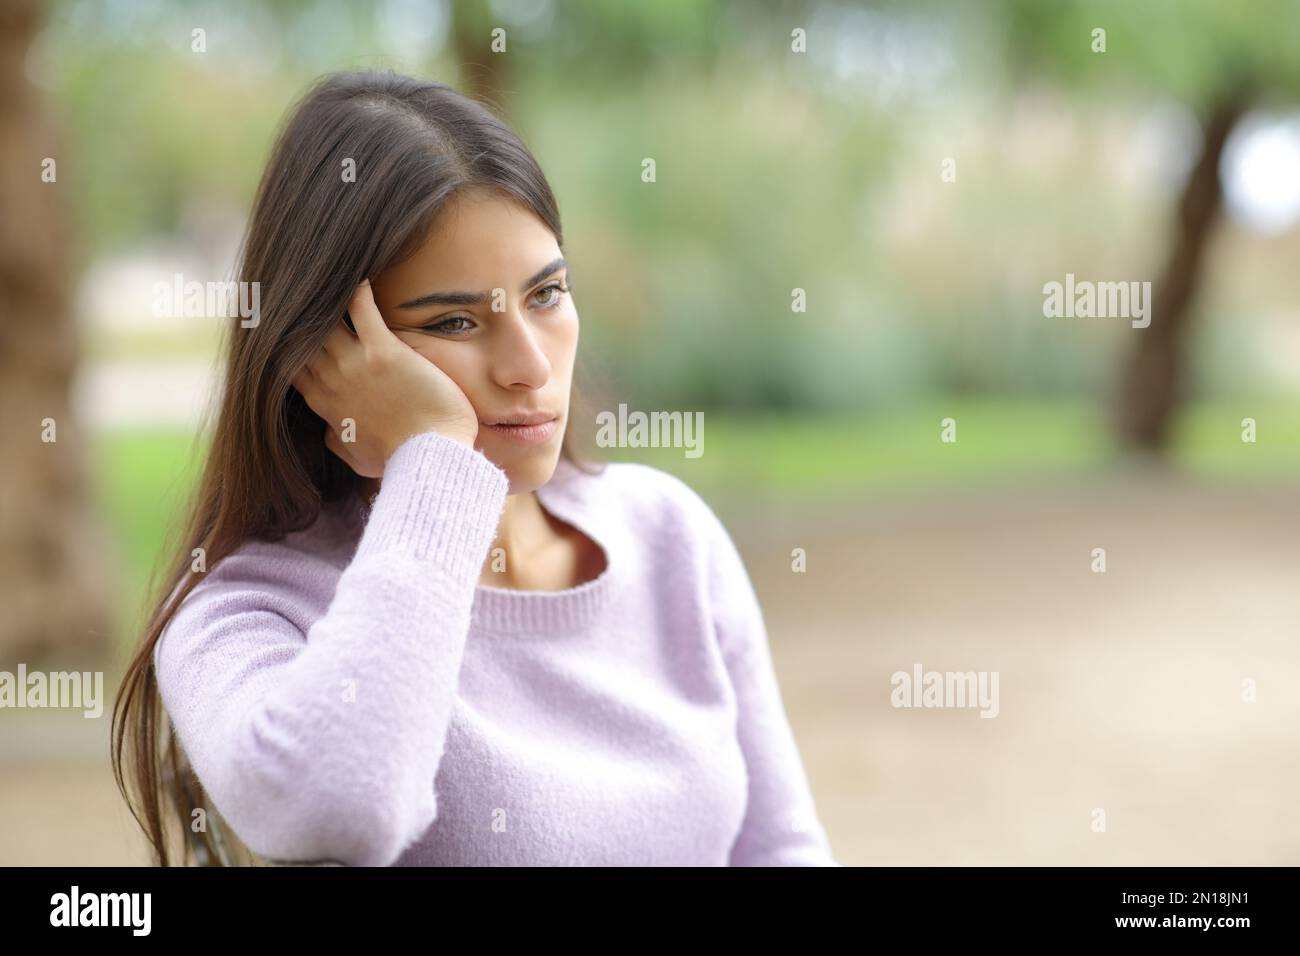 Bored woman sitting in a park alone Stock Photo